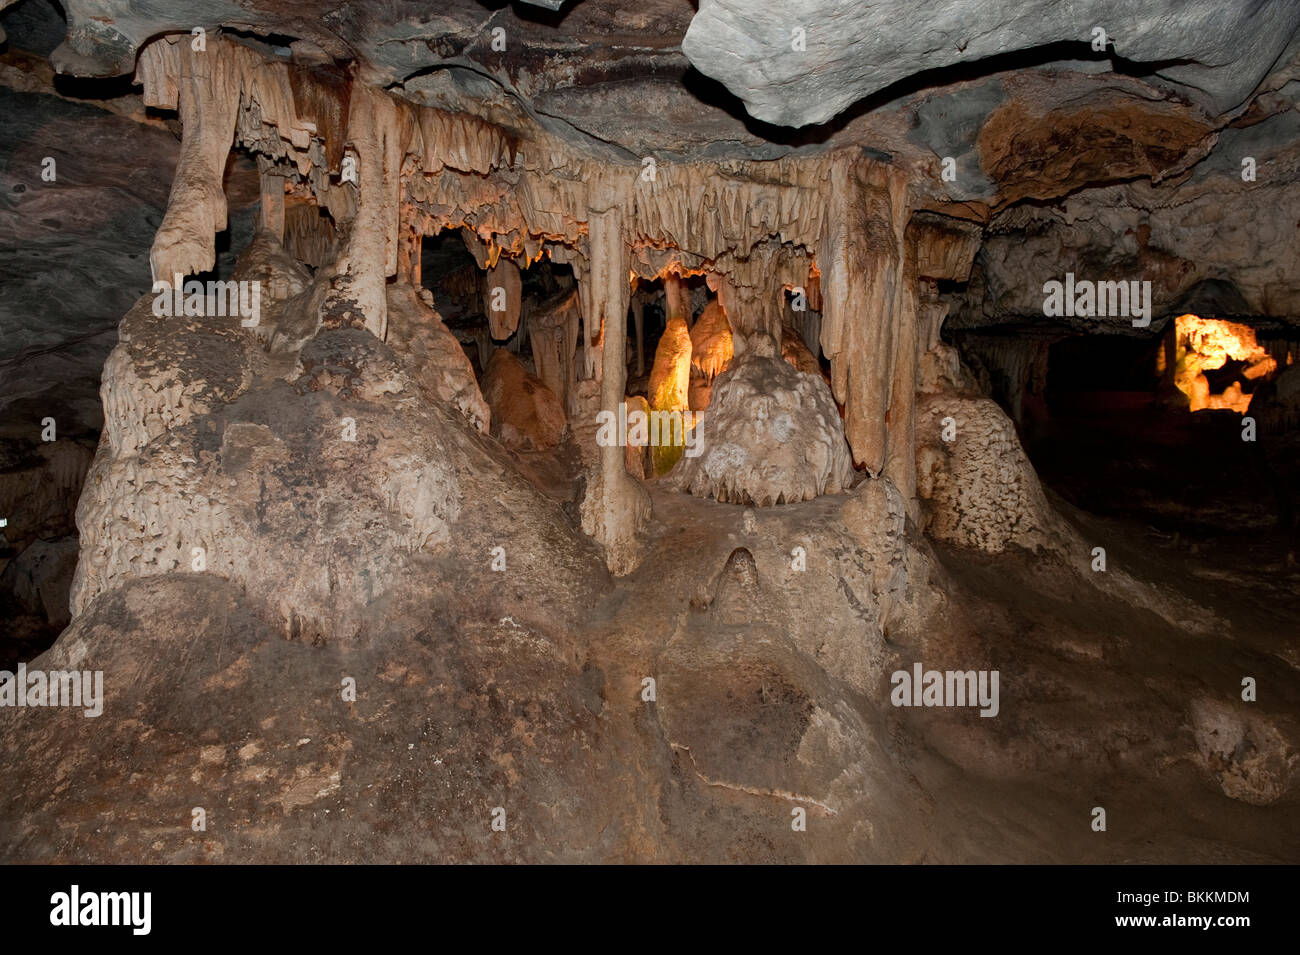 The Bridal Chamber in the Cango Caves, Oudtshoorn, Western Cape, South Africa Stock Photo